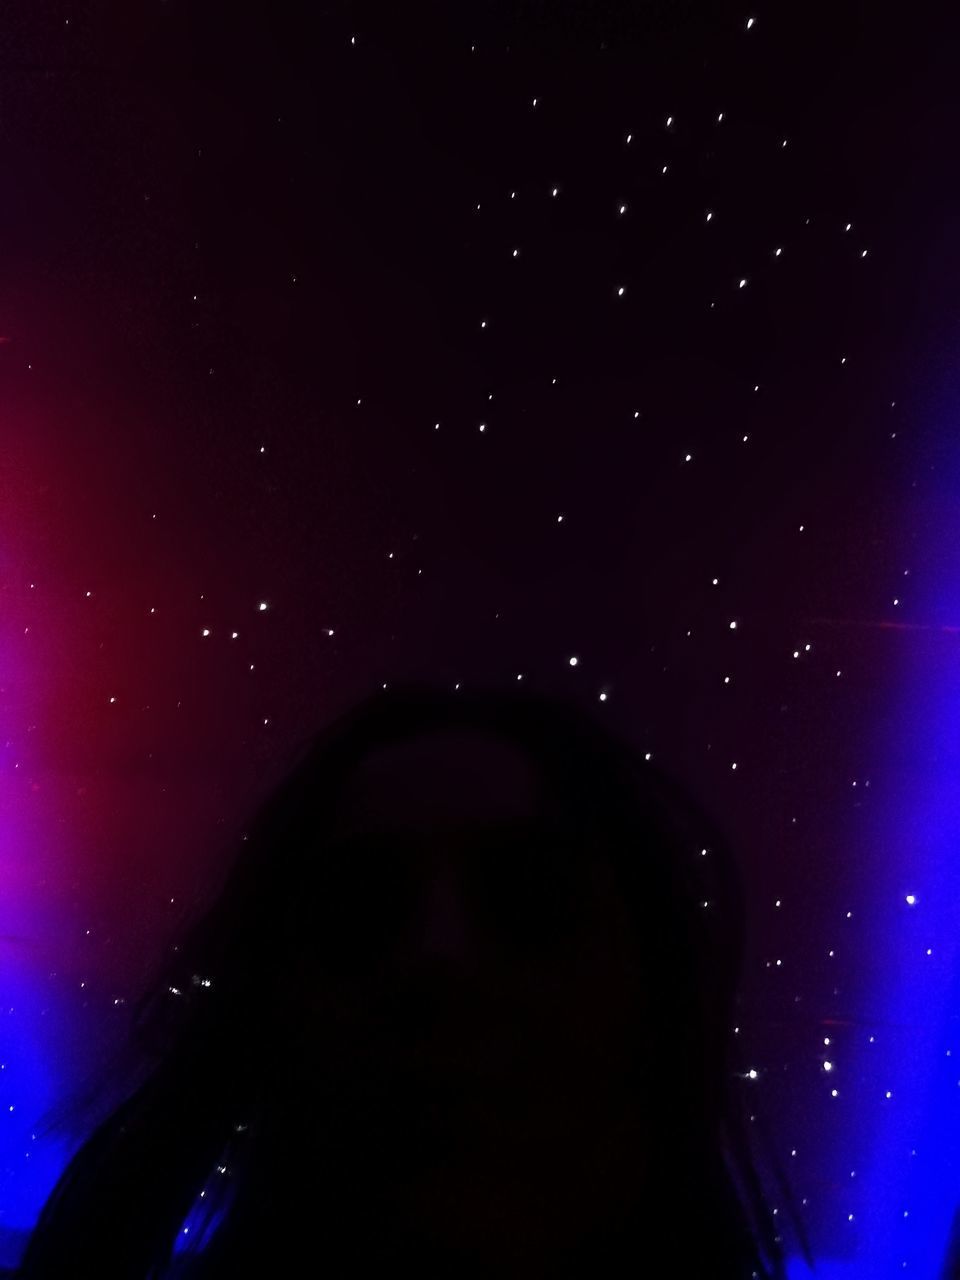 CLOSE-UP OF WOMAN AGAINST STAR FIELD